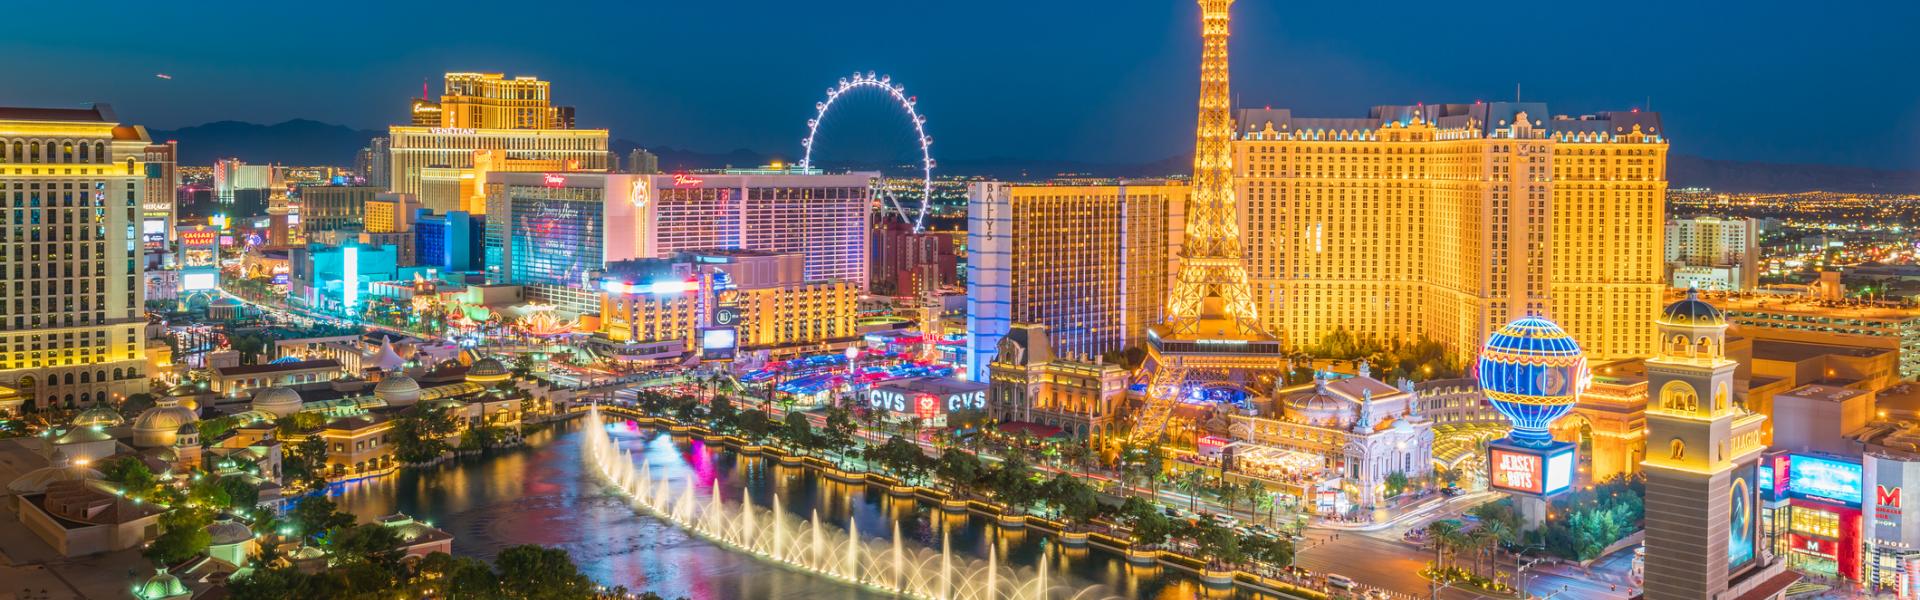 Hotels and Vacation Rentals Near the Las Vegas Strip - HomeToGo